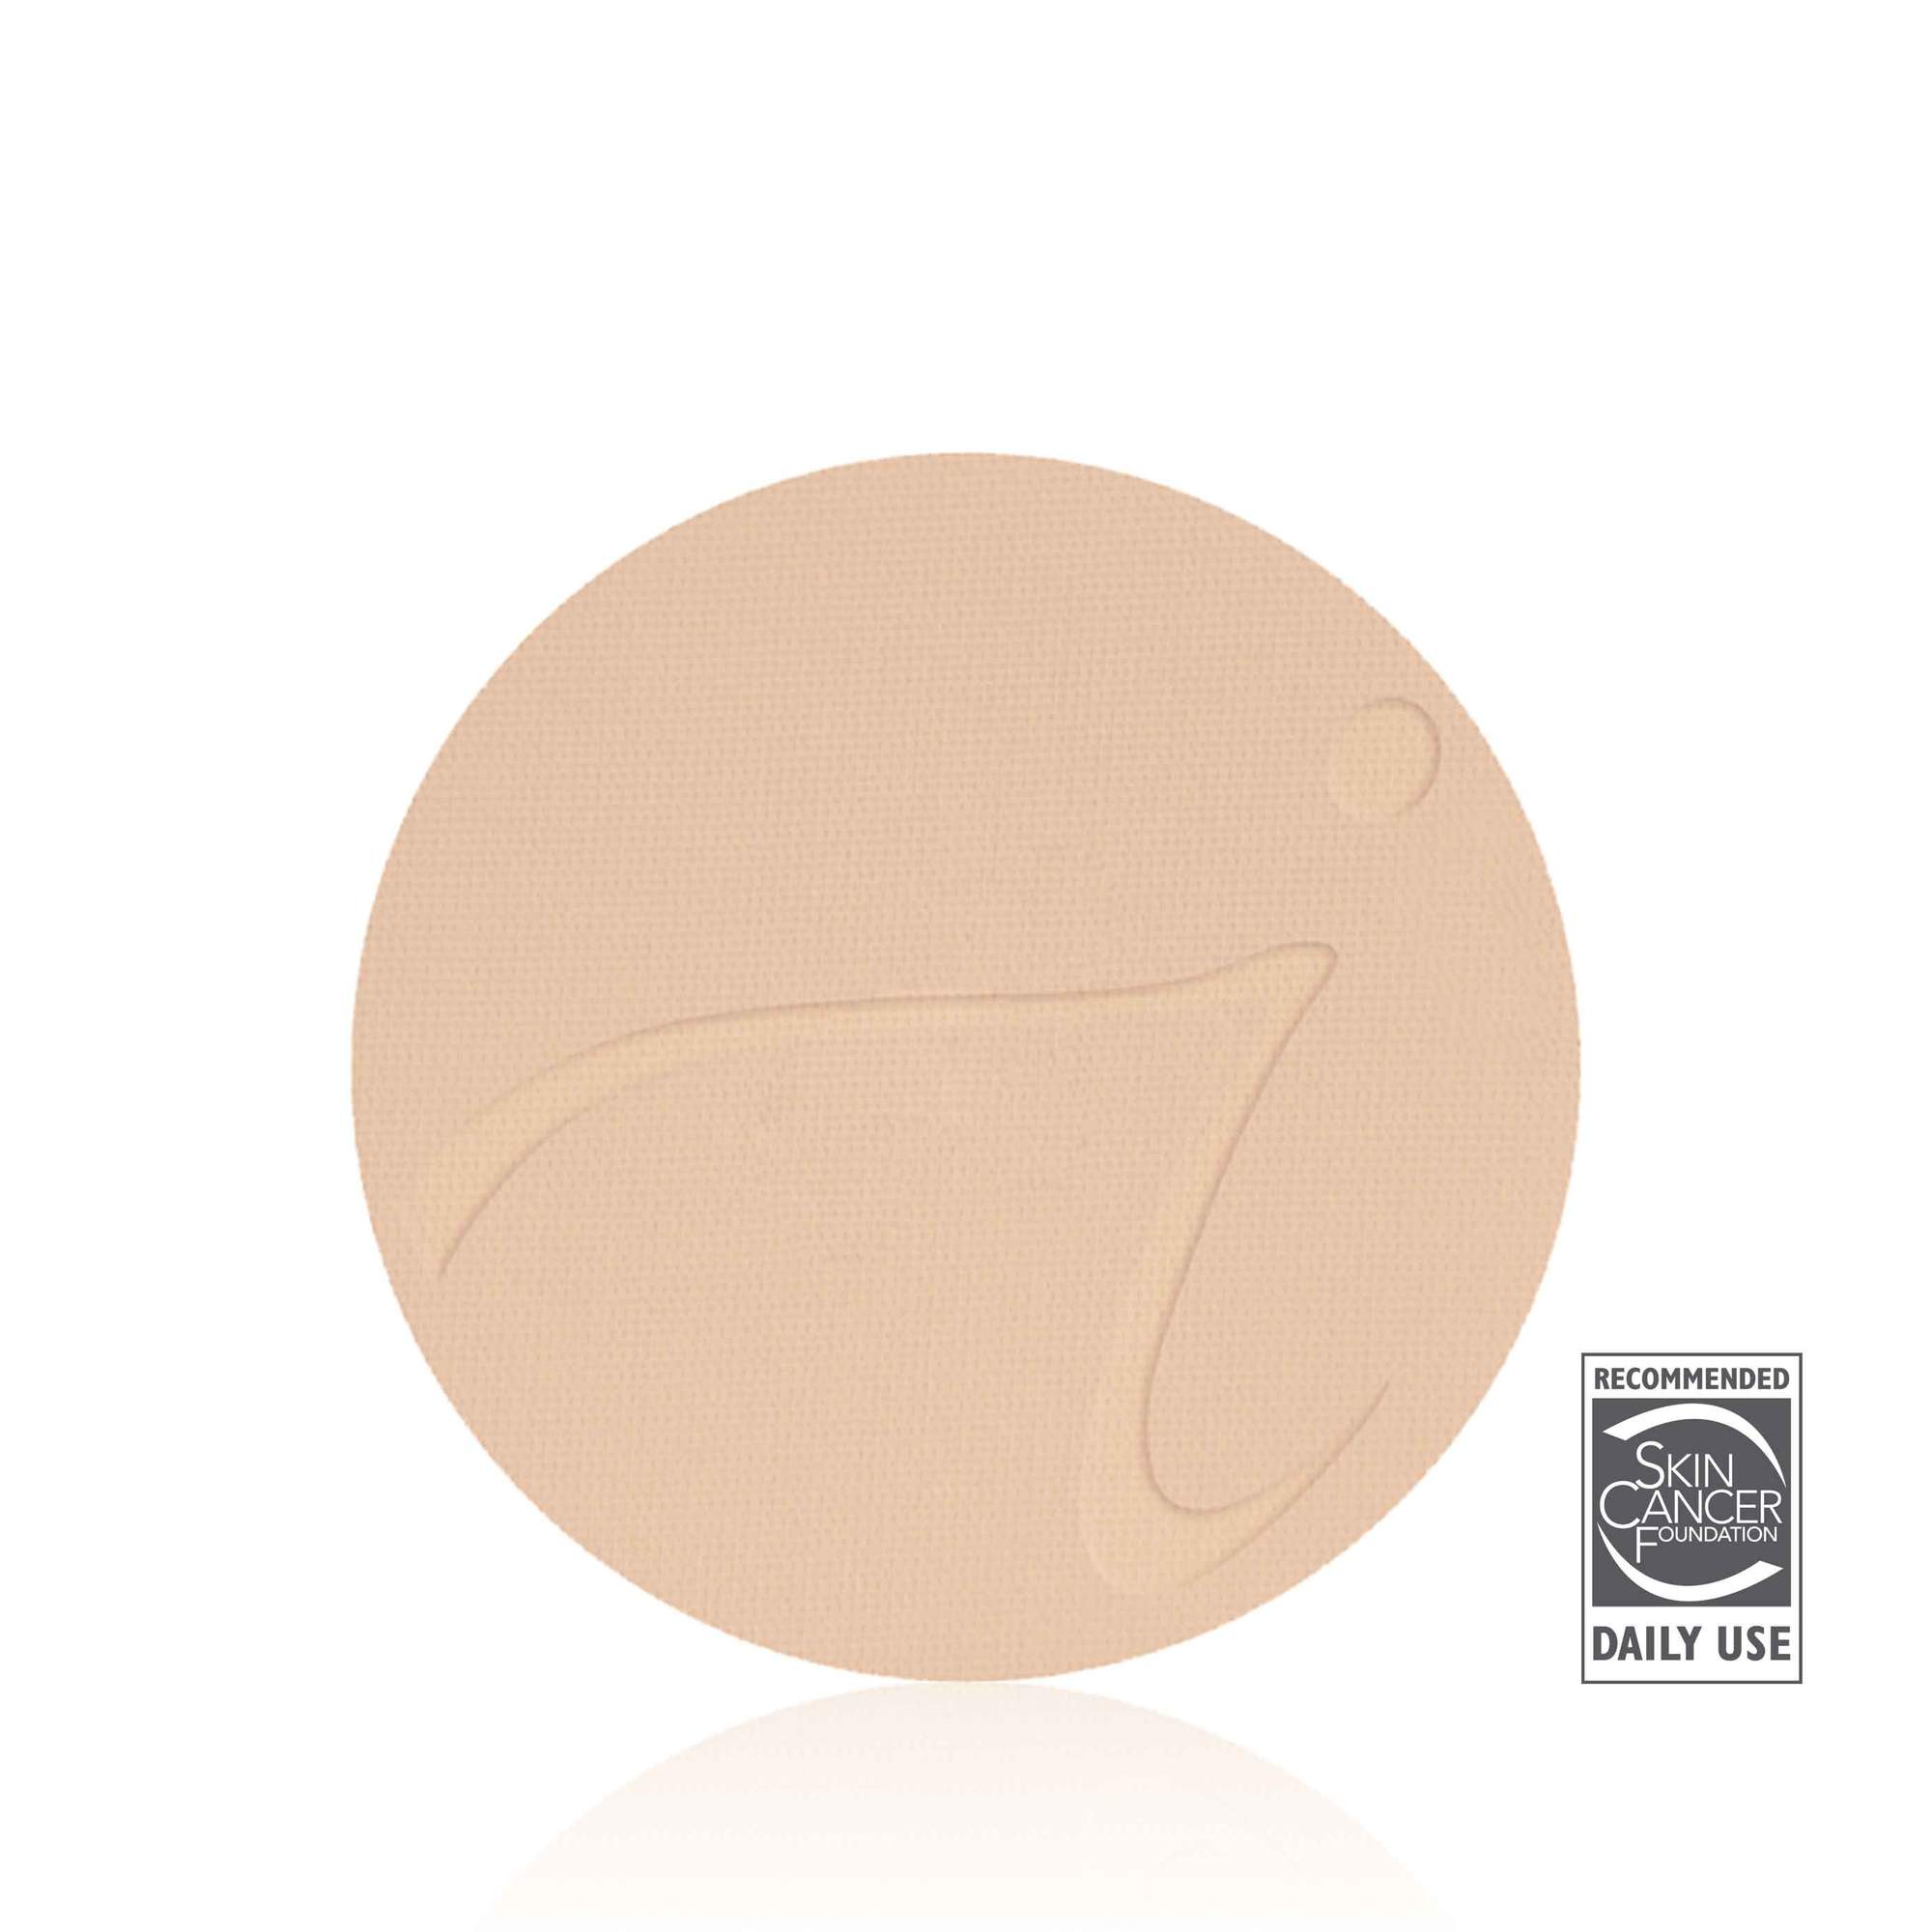 JANE IREDALE PURE PRESSED BASE POWDER REFILL